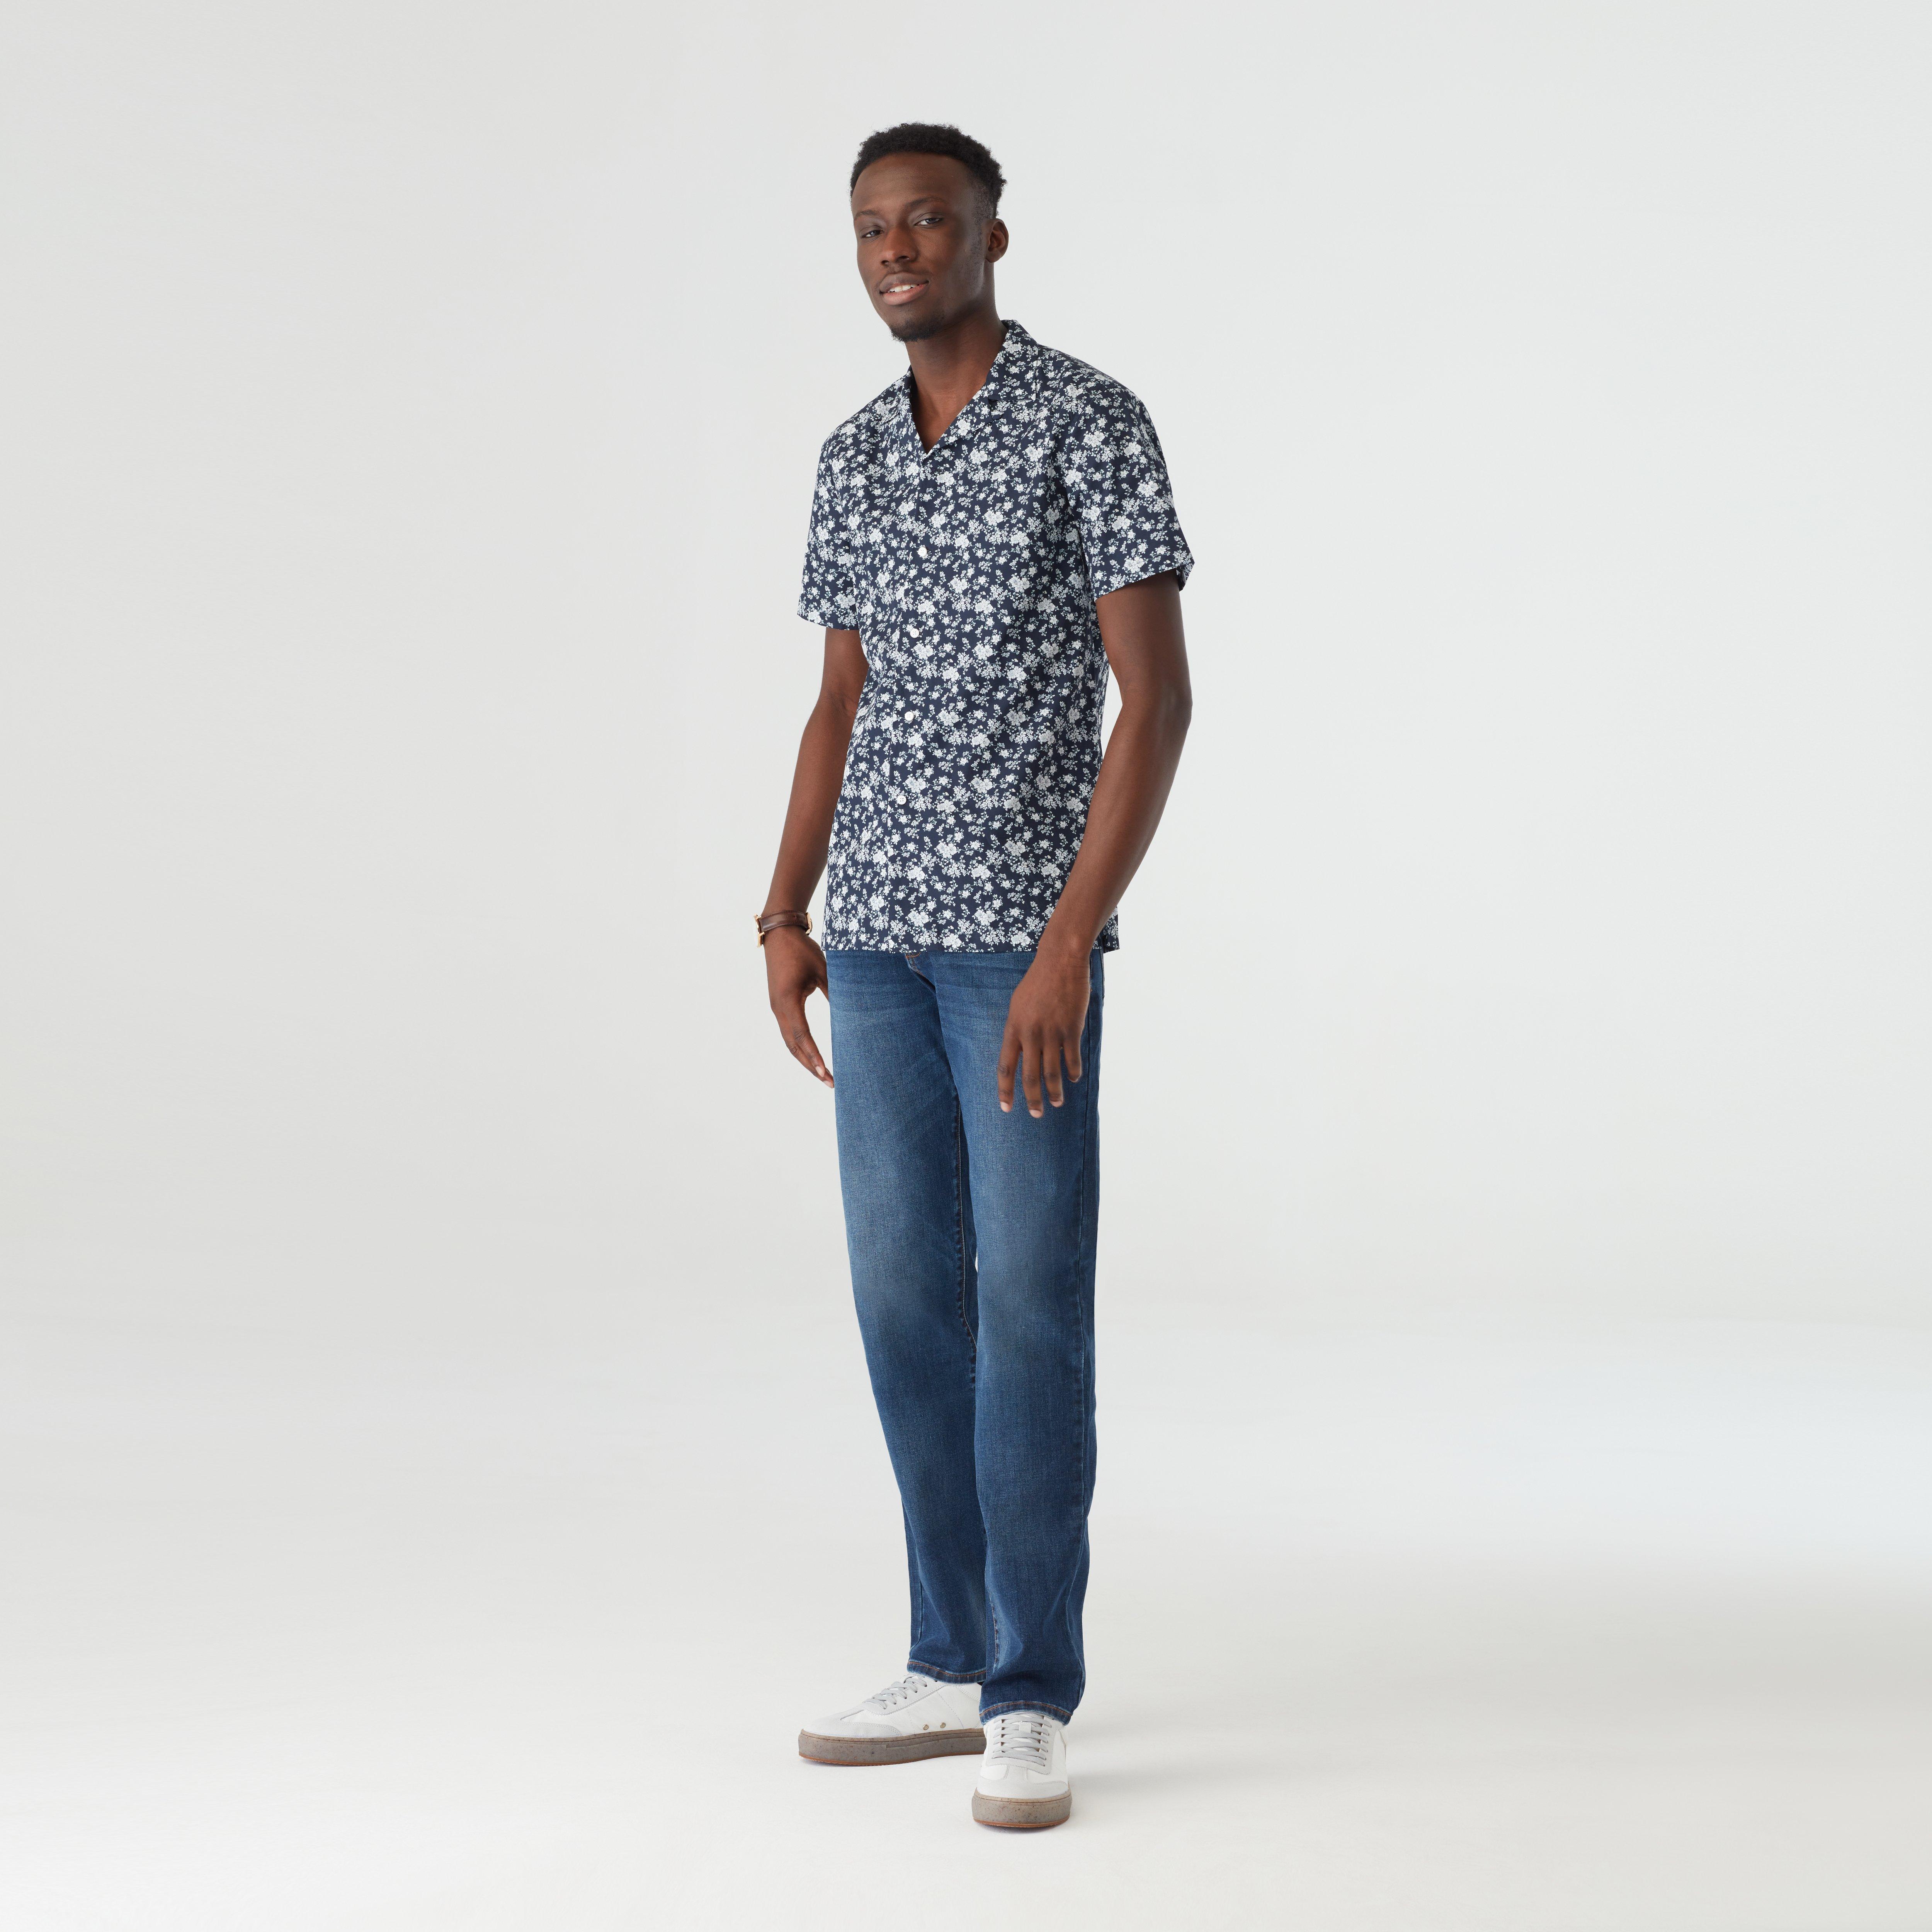 Kith Floral Panel Camp Shirt Navy/Multi